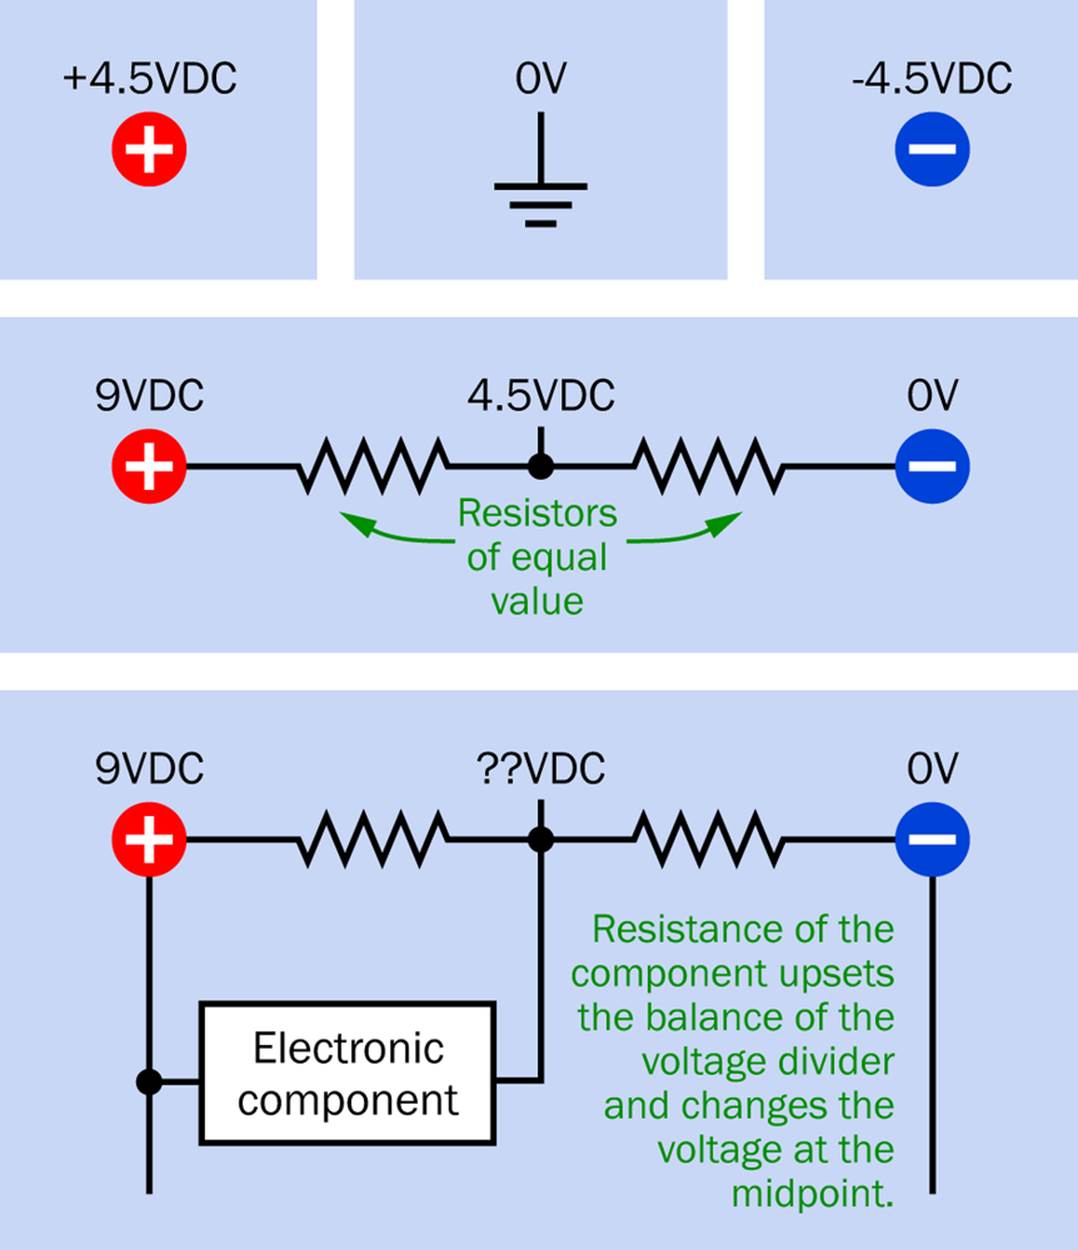 Ideally an op-amp should have a split power supply, with a neutral center reference value that is depicted by a ground symbol in schematics, as shown in the top section of this figure. The split supply can be emulated with a voltage divider, as in the middle section. But the center value will be affected by any component sinking power into it (or drawing current from it), as shown in the bottom section.